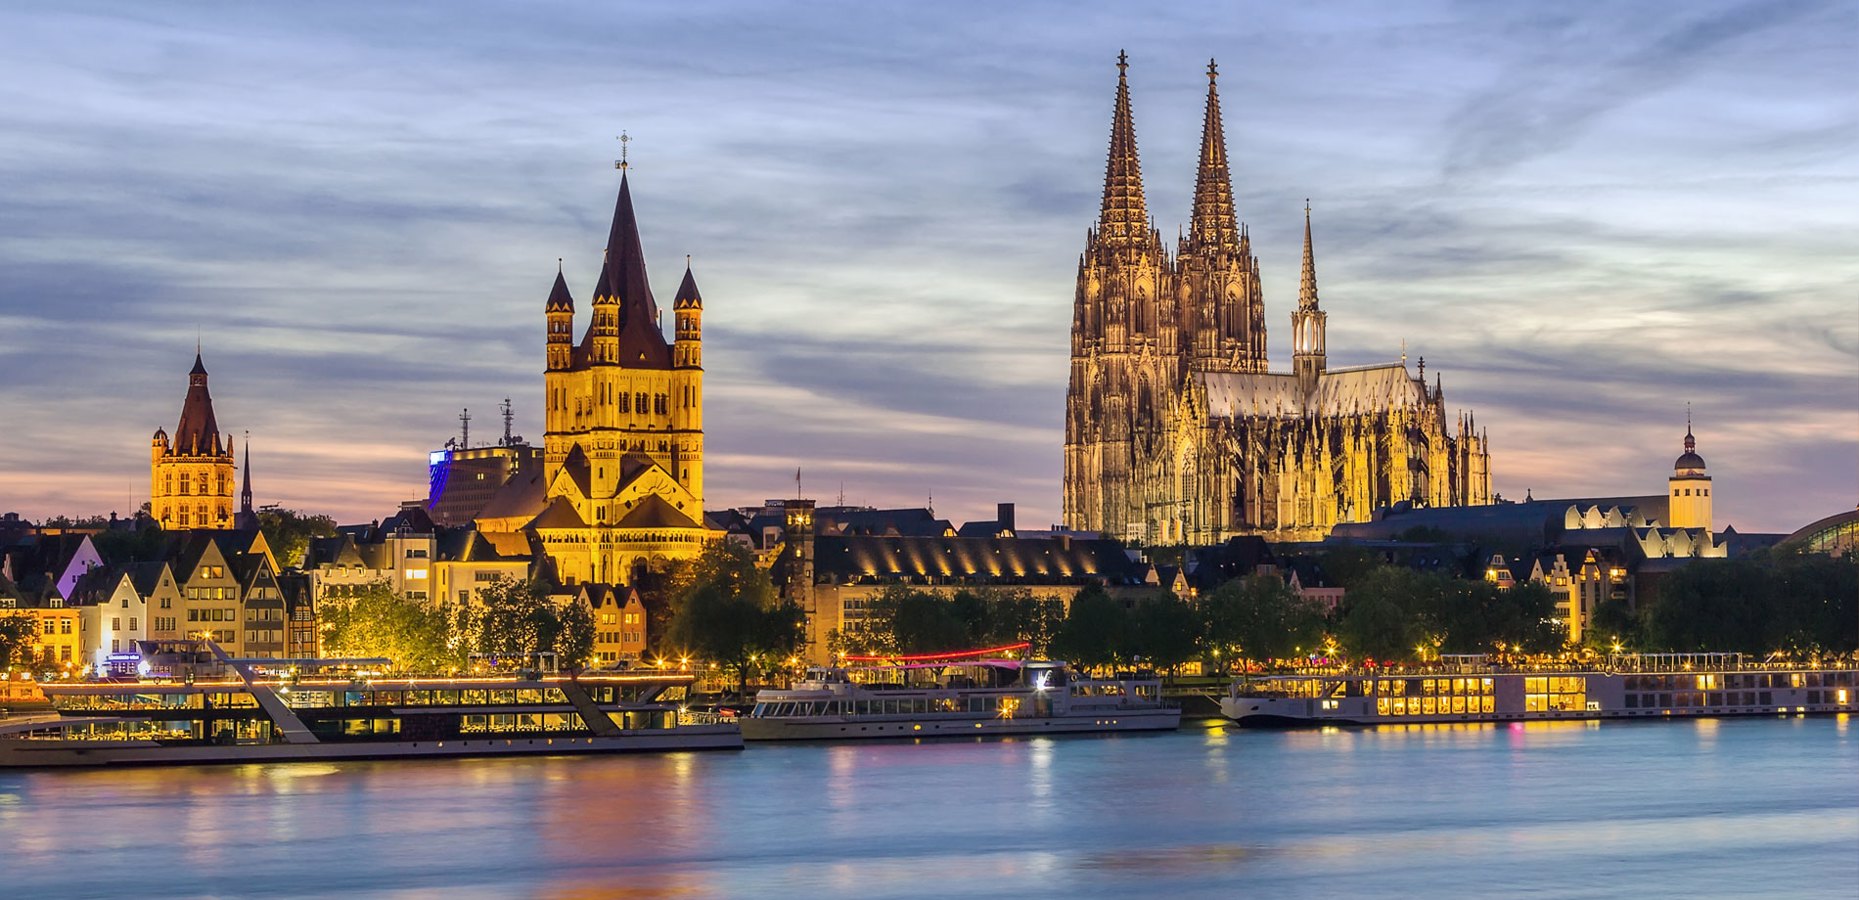 Cologne. View of the Historic centre from the River Rhine.